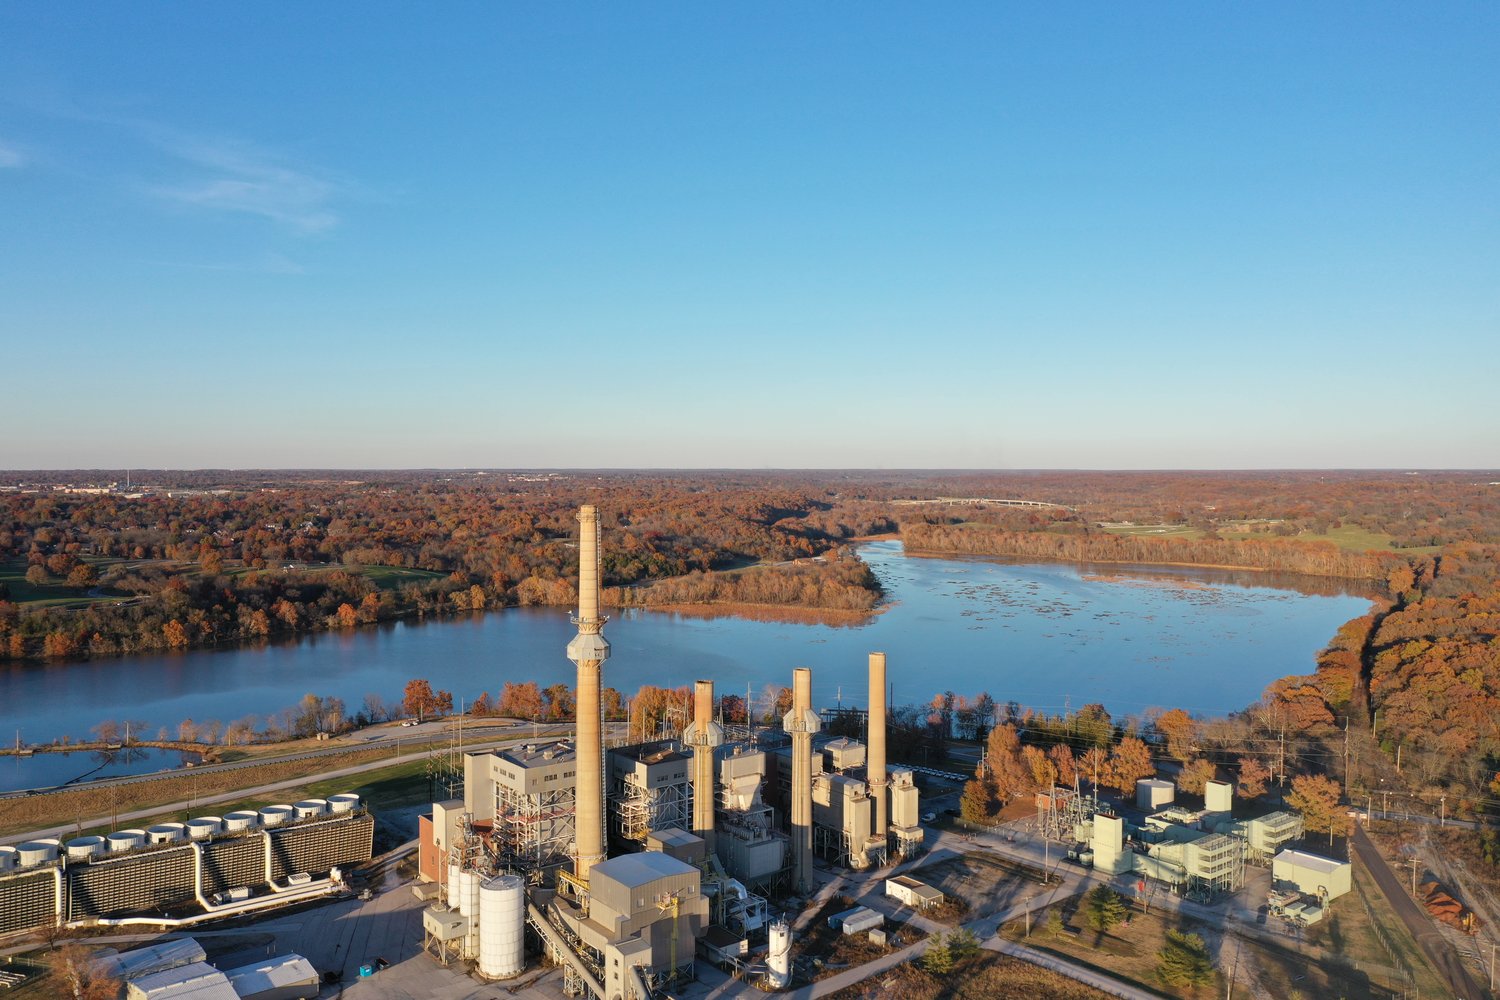 The majority of James River Power Station’s power-generation operations are no longer in use.